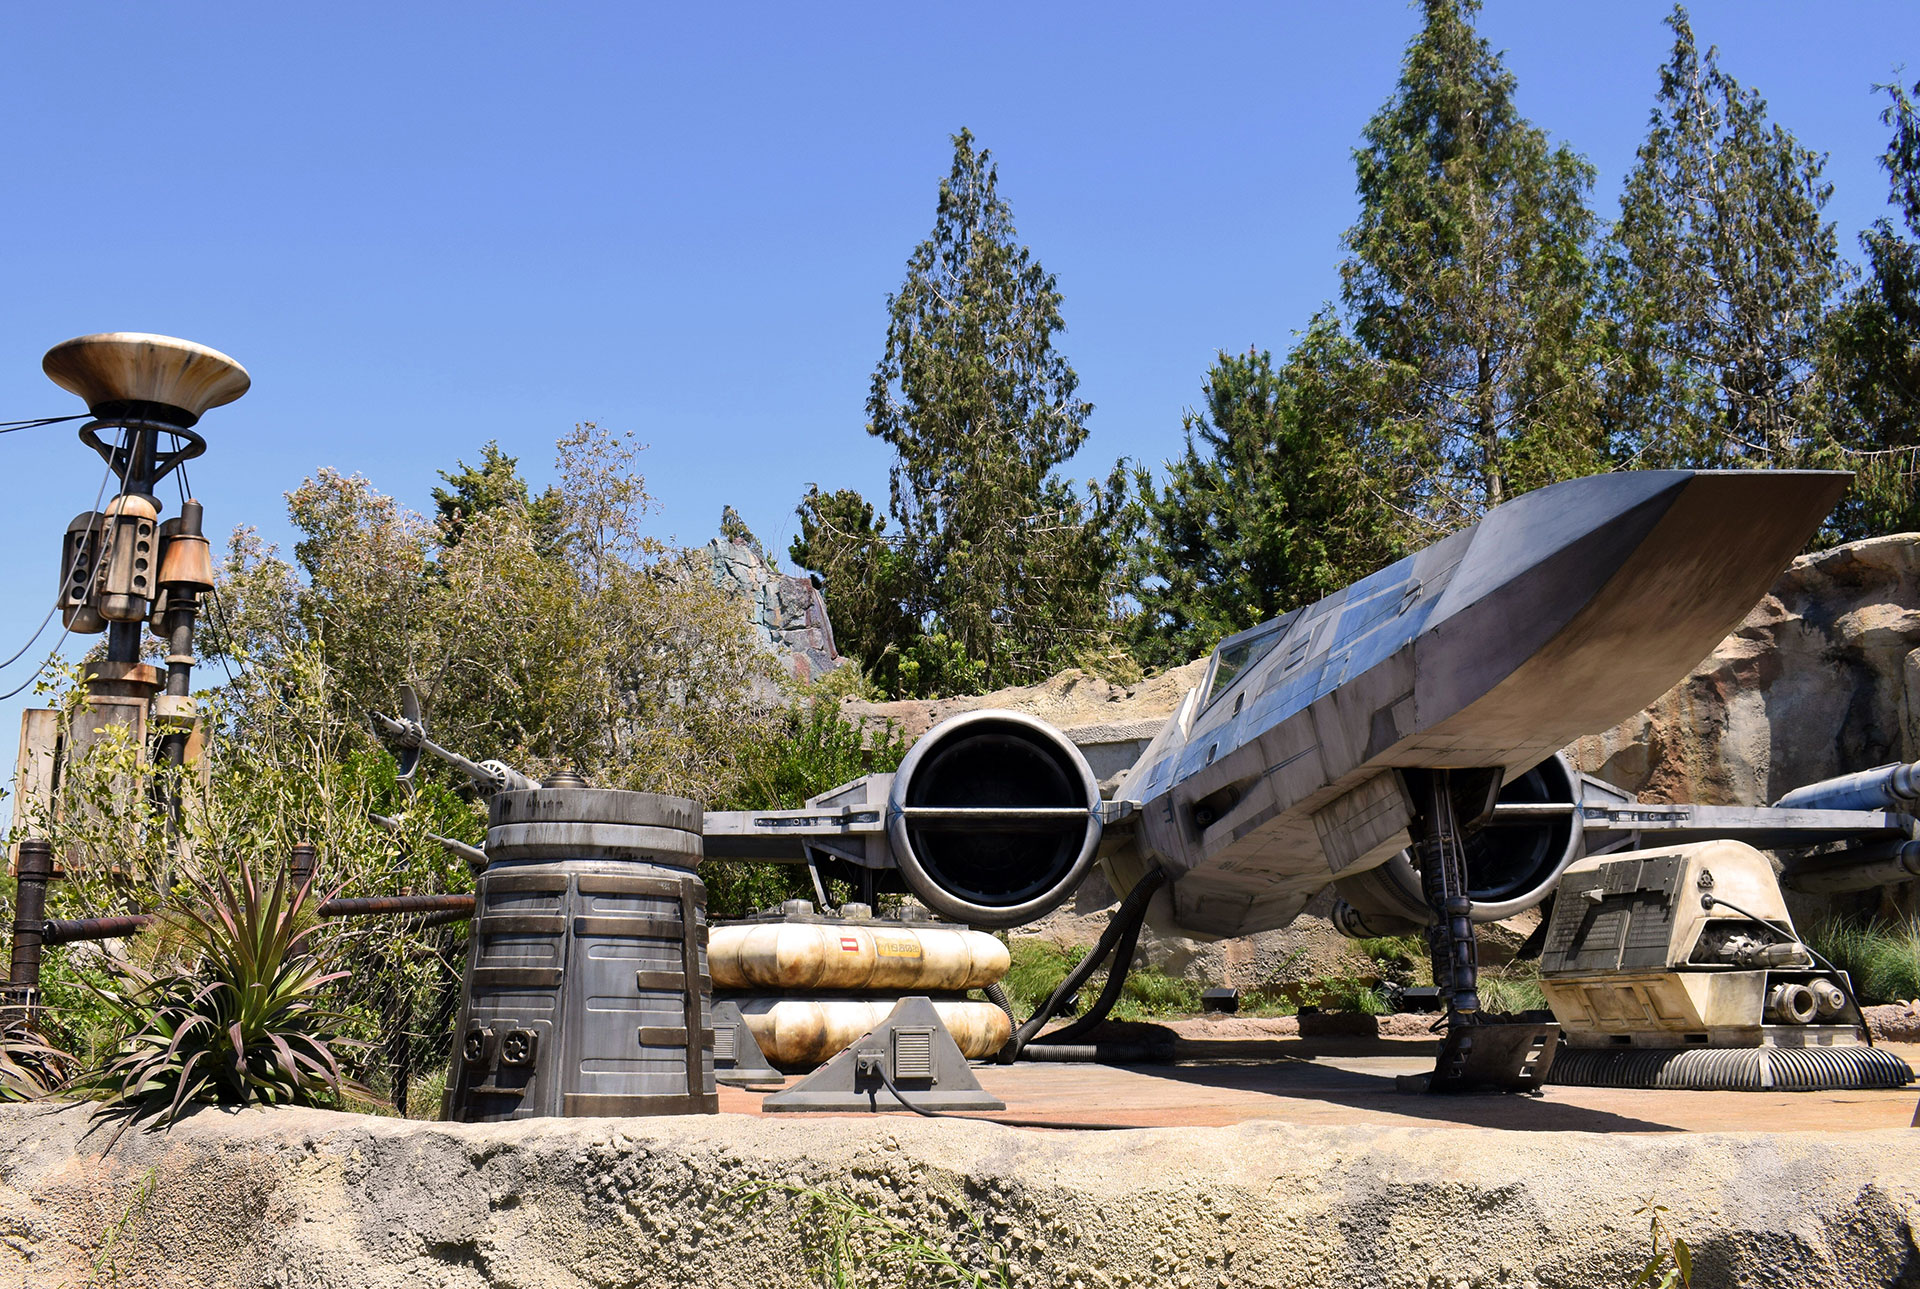 Star Wars Galaxy’s Edge X-Wing Fighter; Courtesy of Dave Parfitt